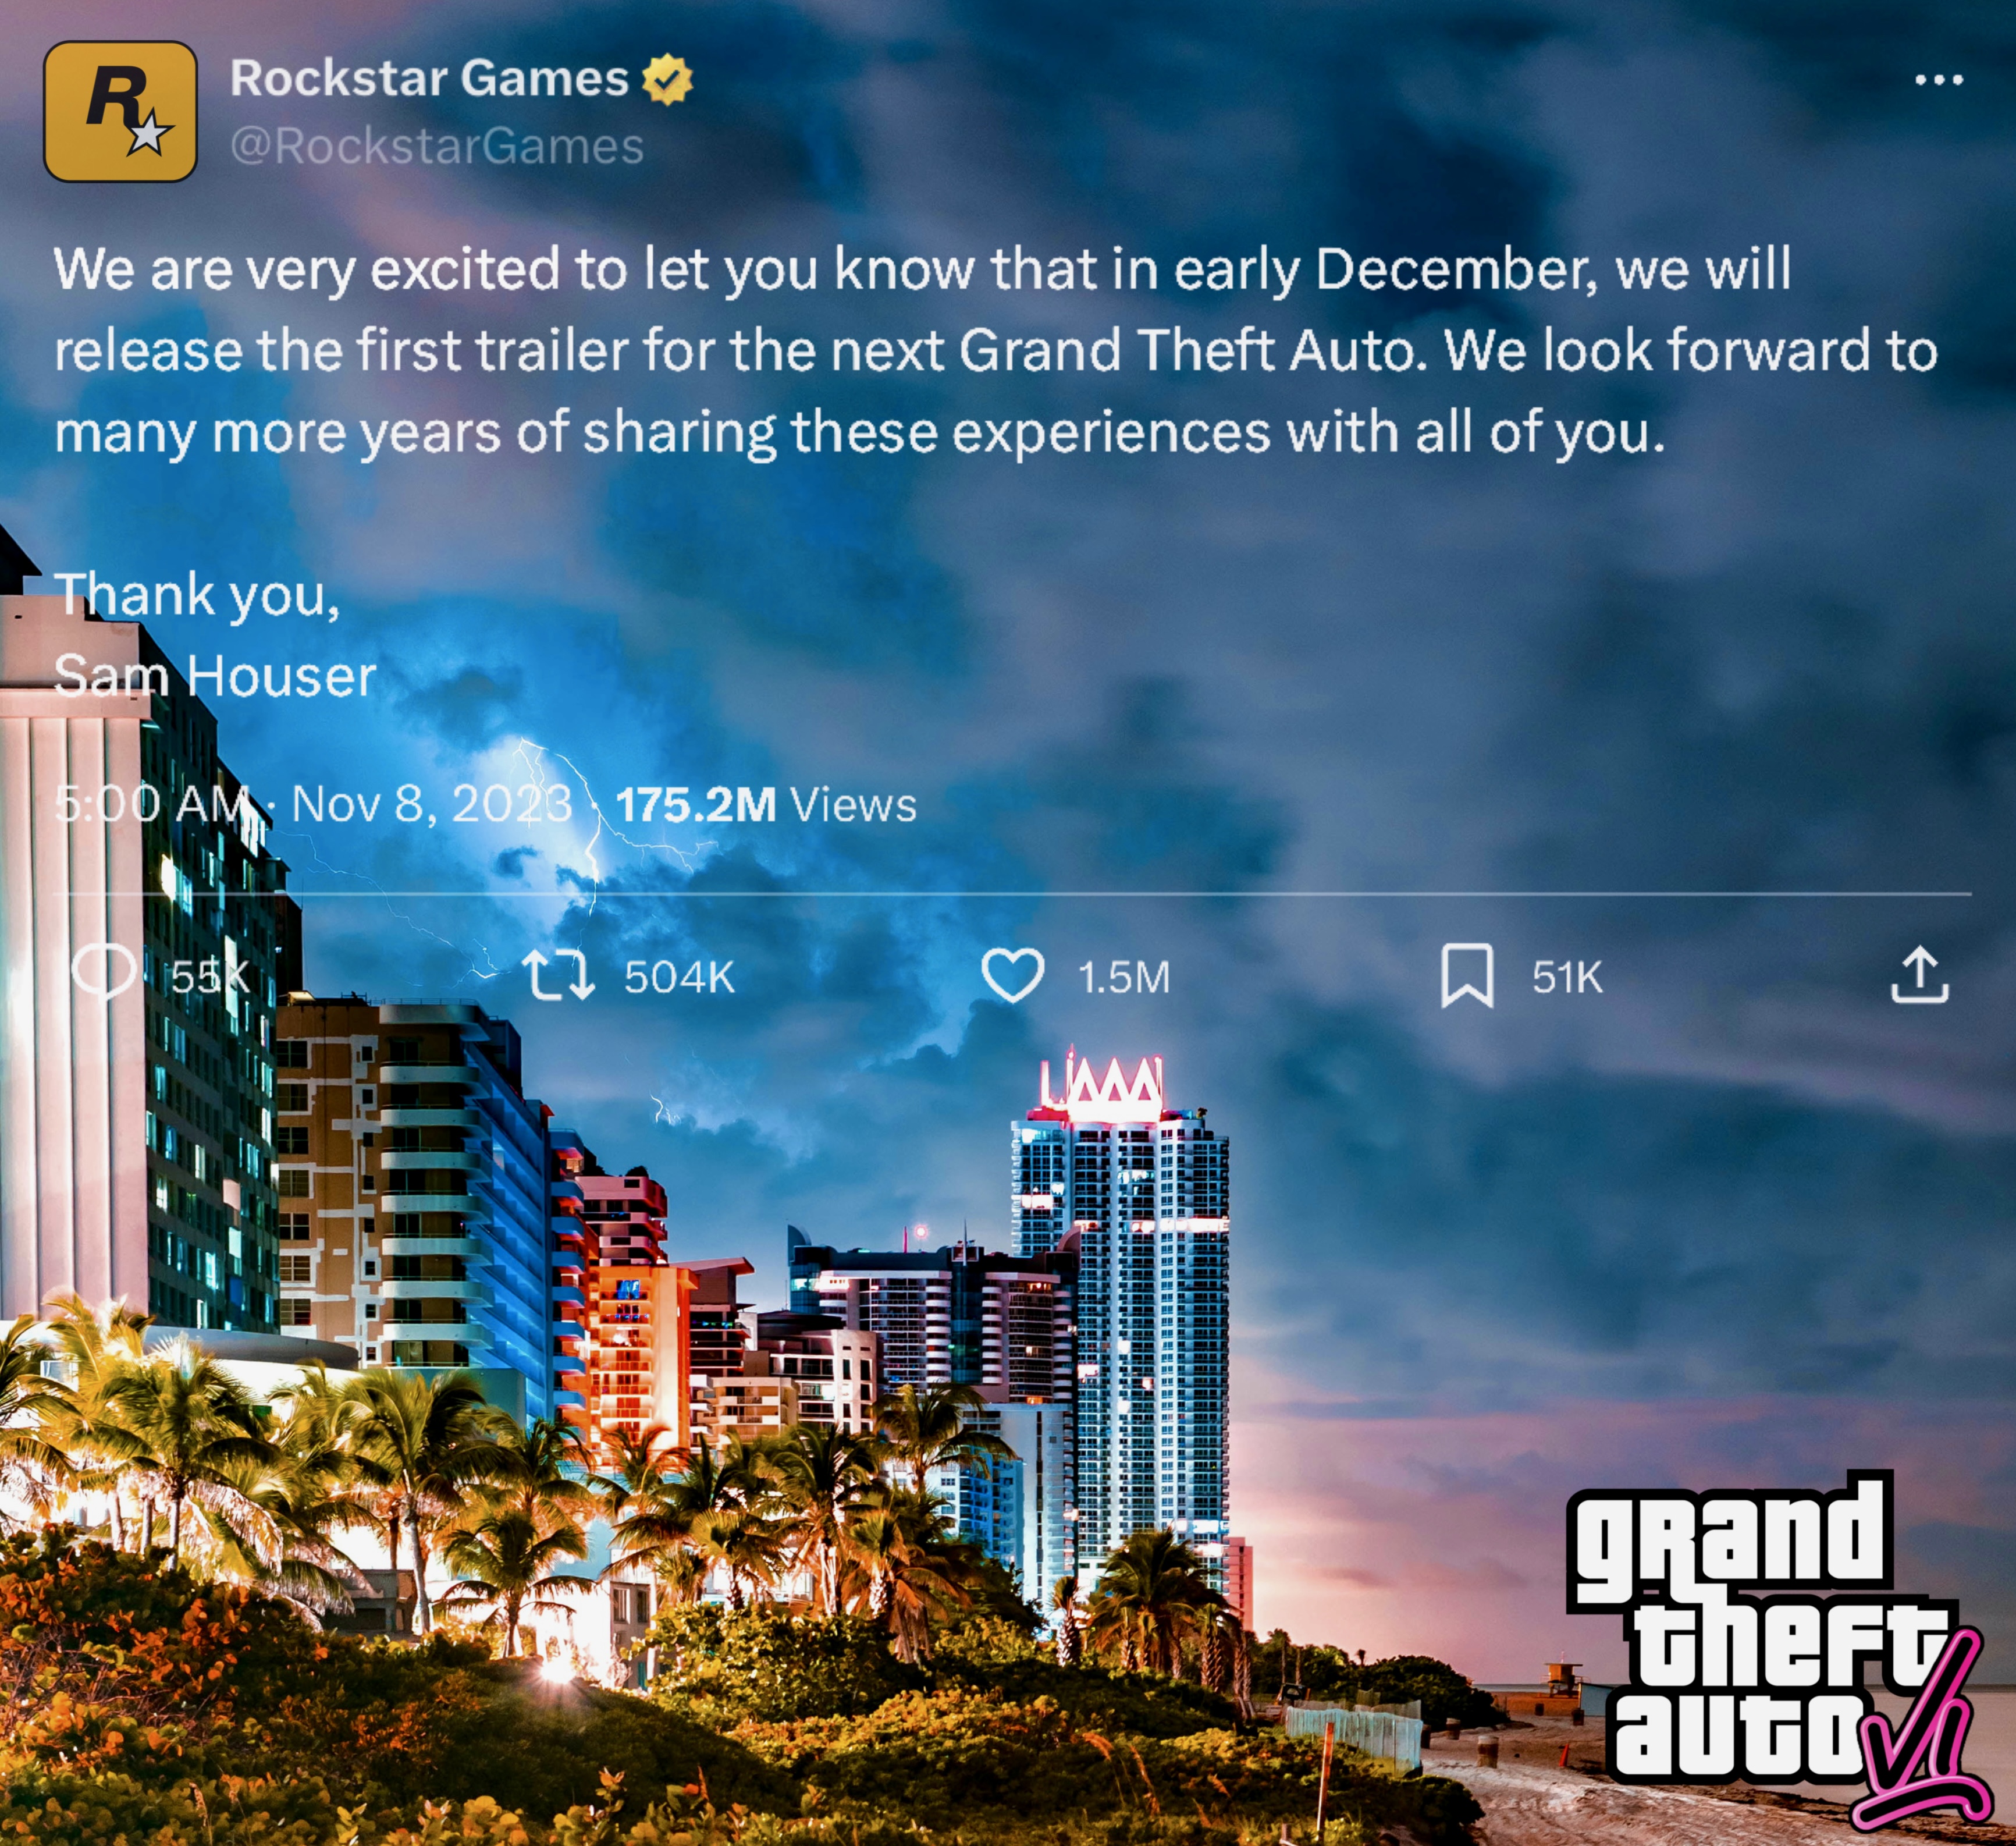 GTA 6 Trailer Countdown ⏳ on X: 300 days ago, an hour of GTA 6 footage was  leaked. Rockstar's response became the most liked gaming tweet of all time,  assuring fans that